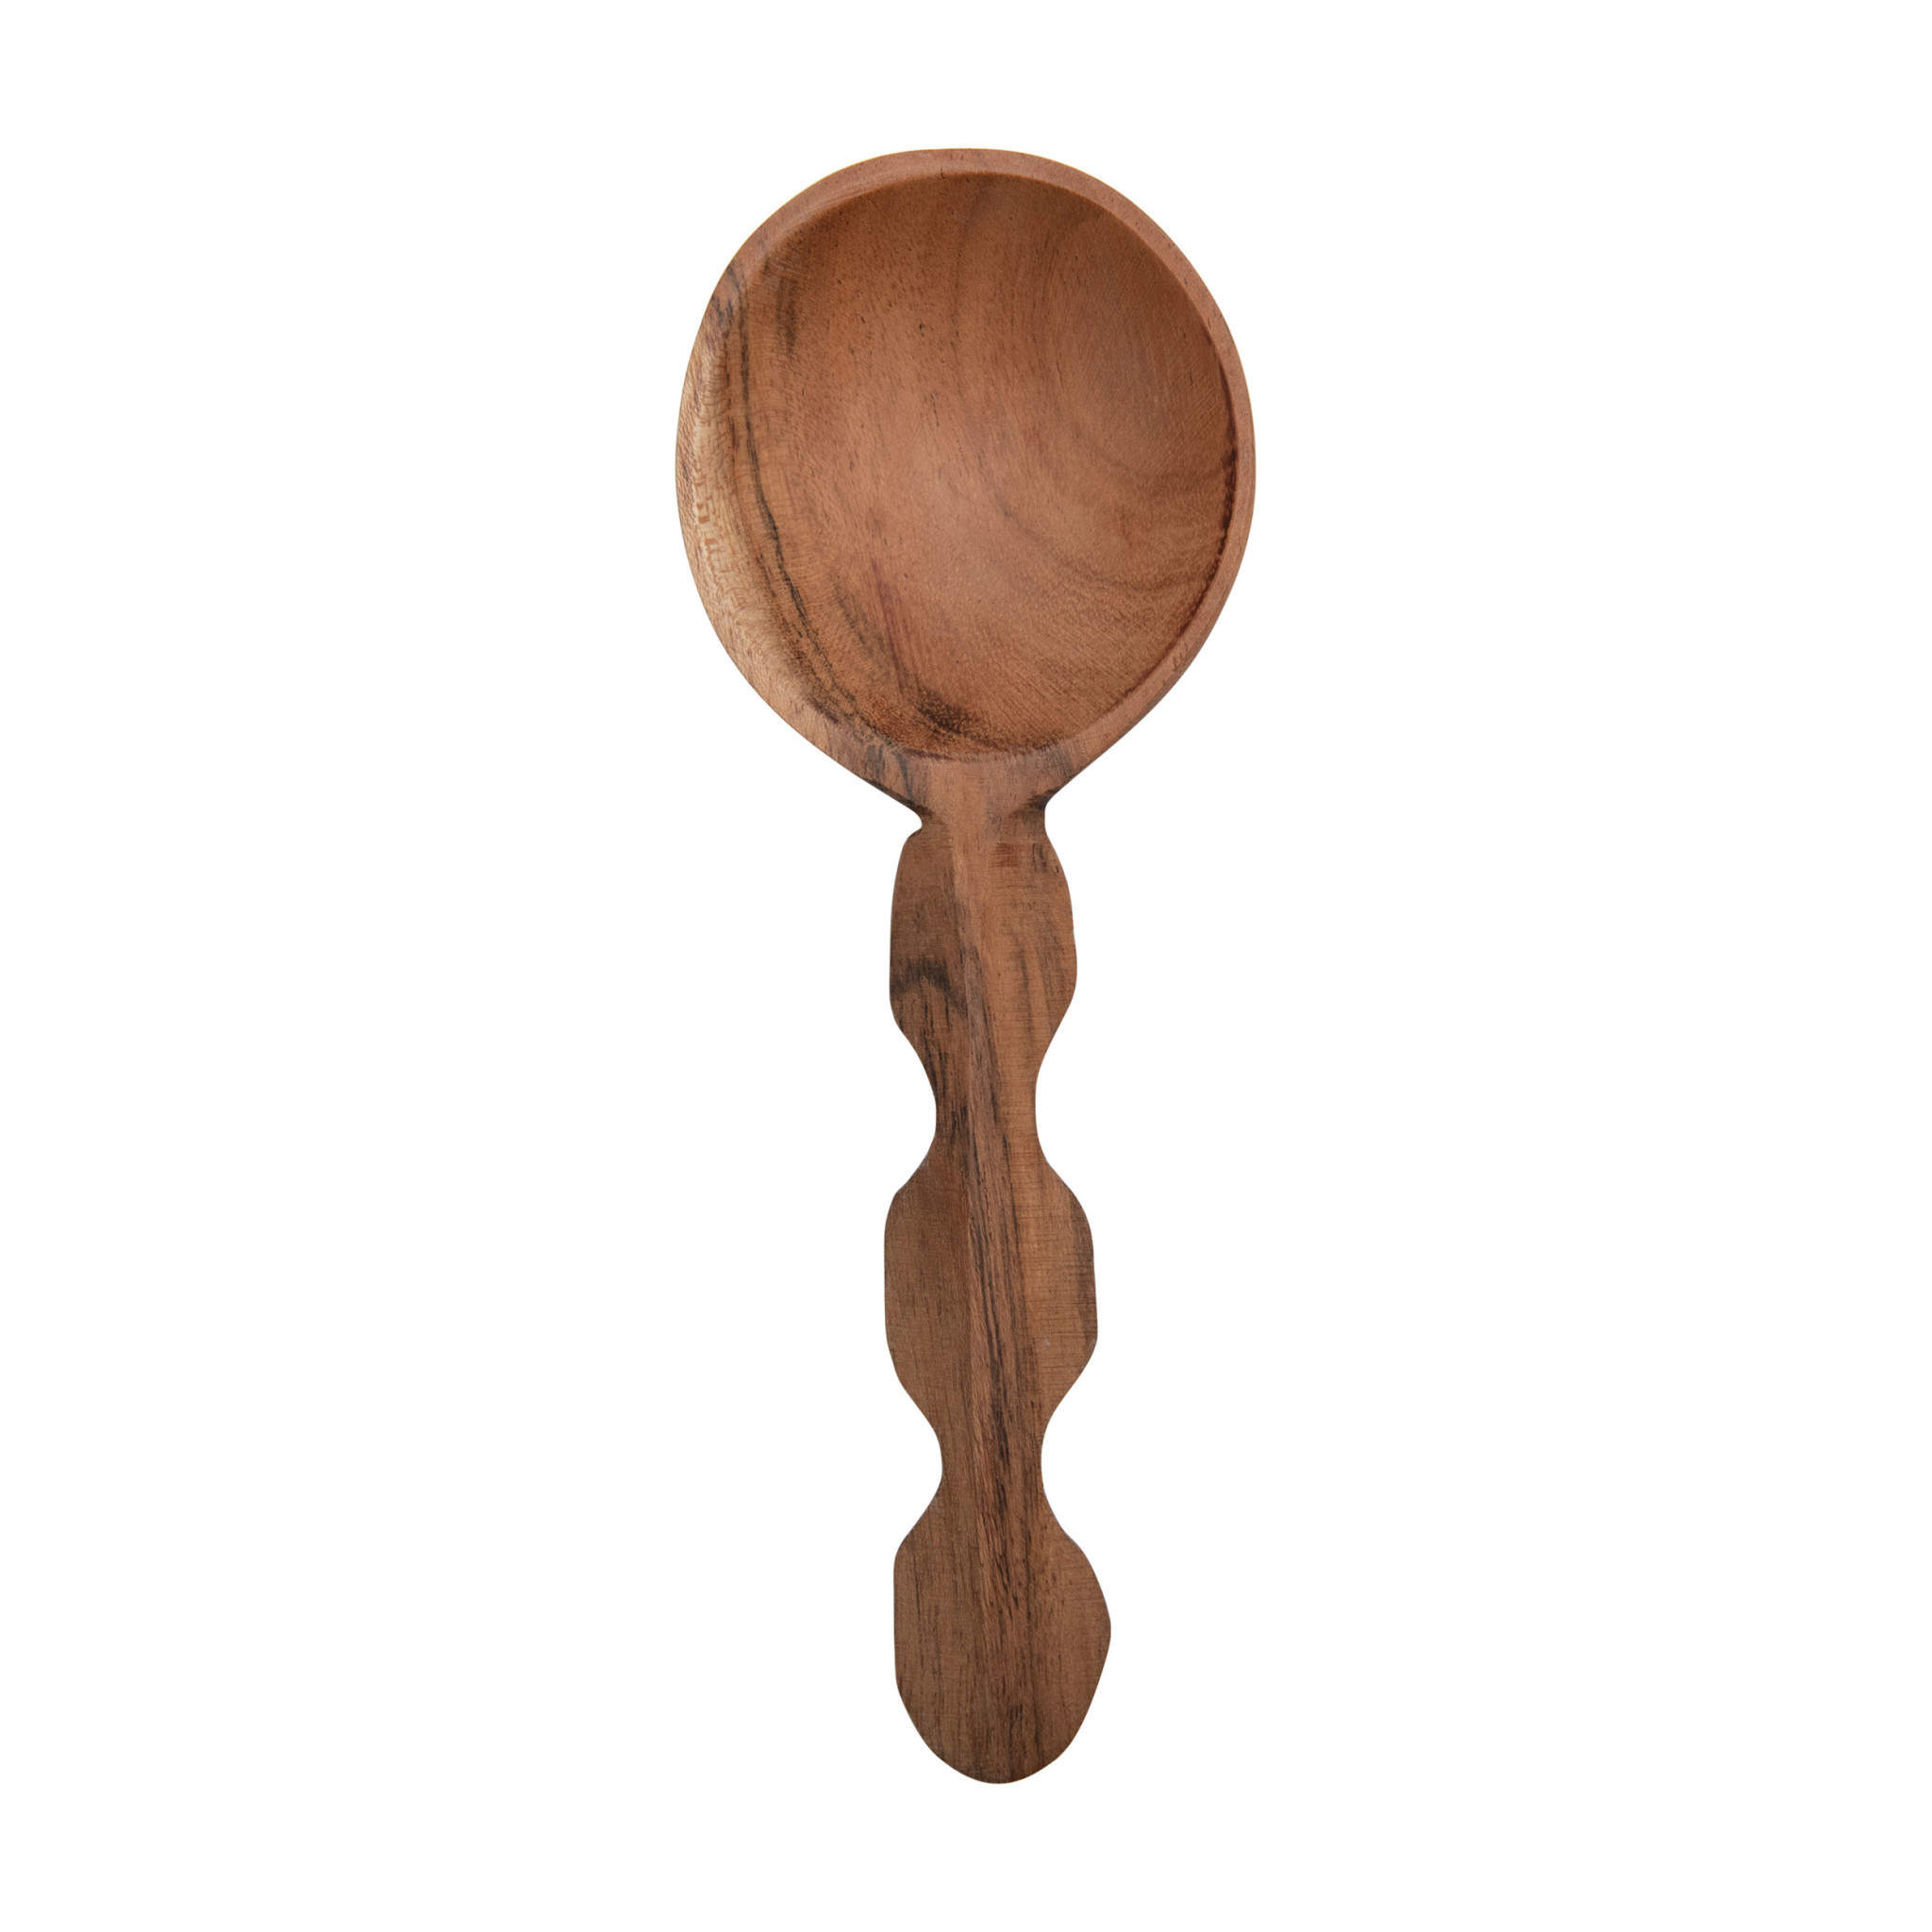 Scalloped Hand-Carved Acacia Wood Spoon, 6.5" x 2"